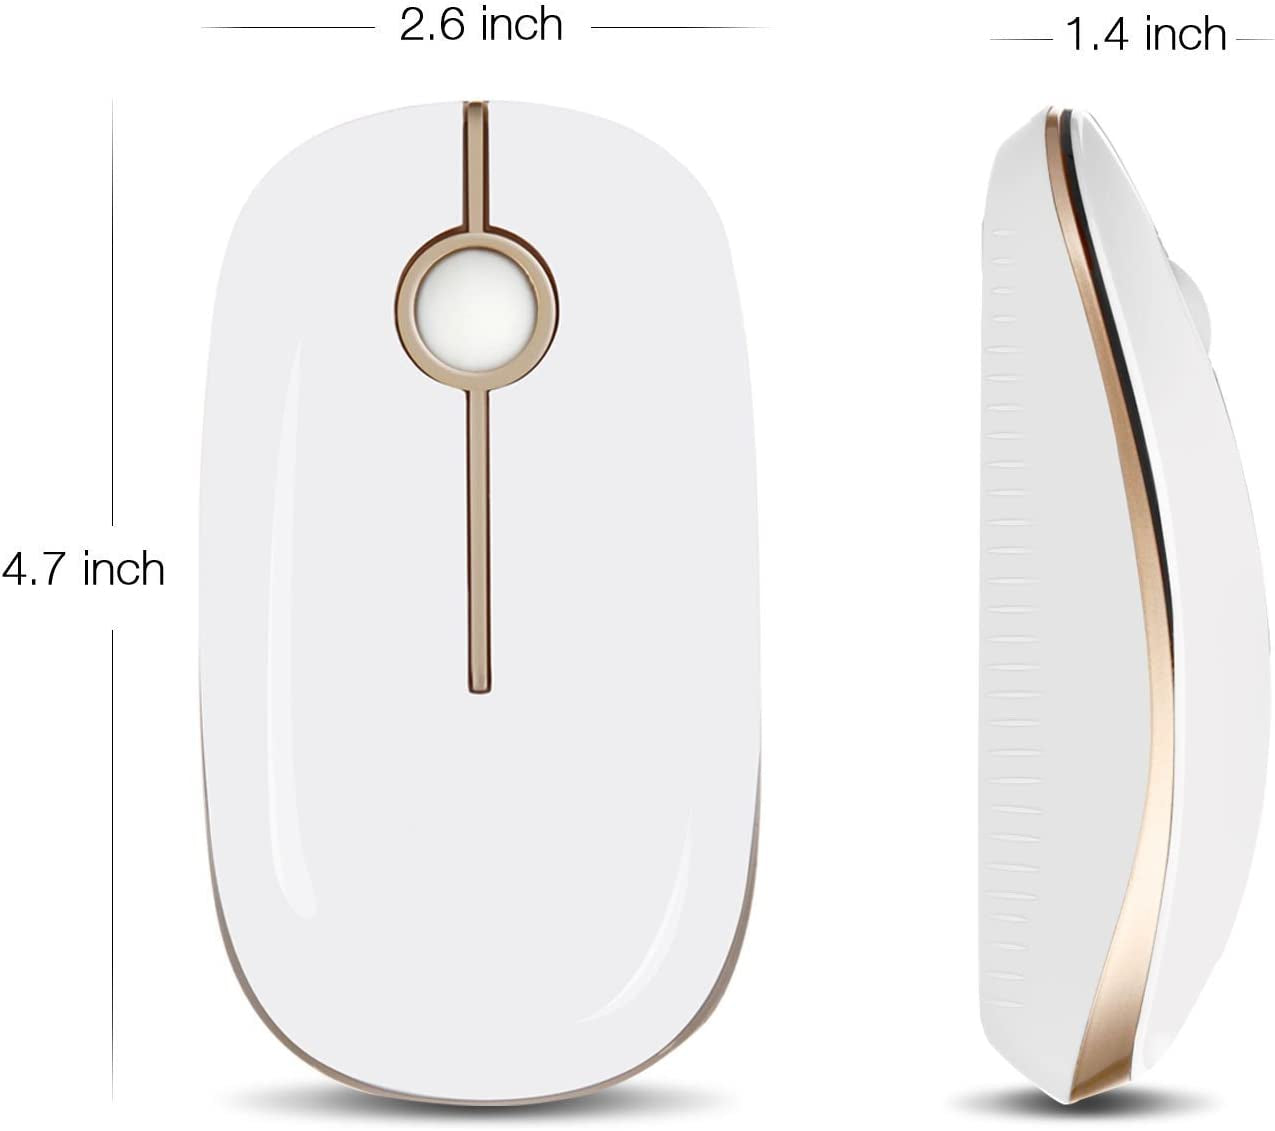 Slim and Portable 2.4G Wireless Mouse with Nano Receiver for Notebook, PC, Laptop, and Computer - White and Gold